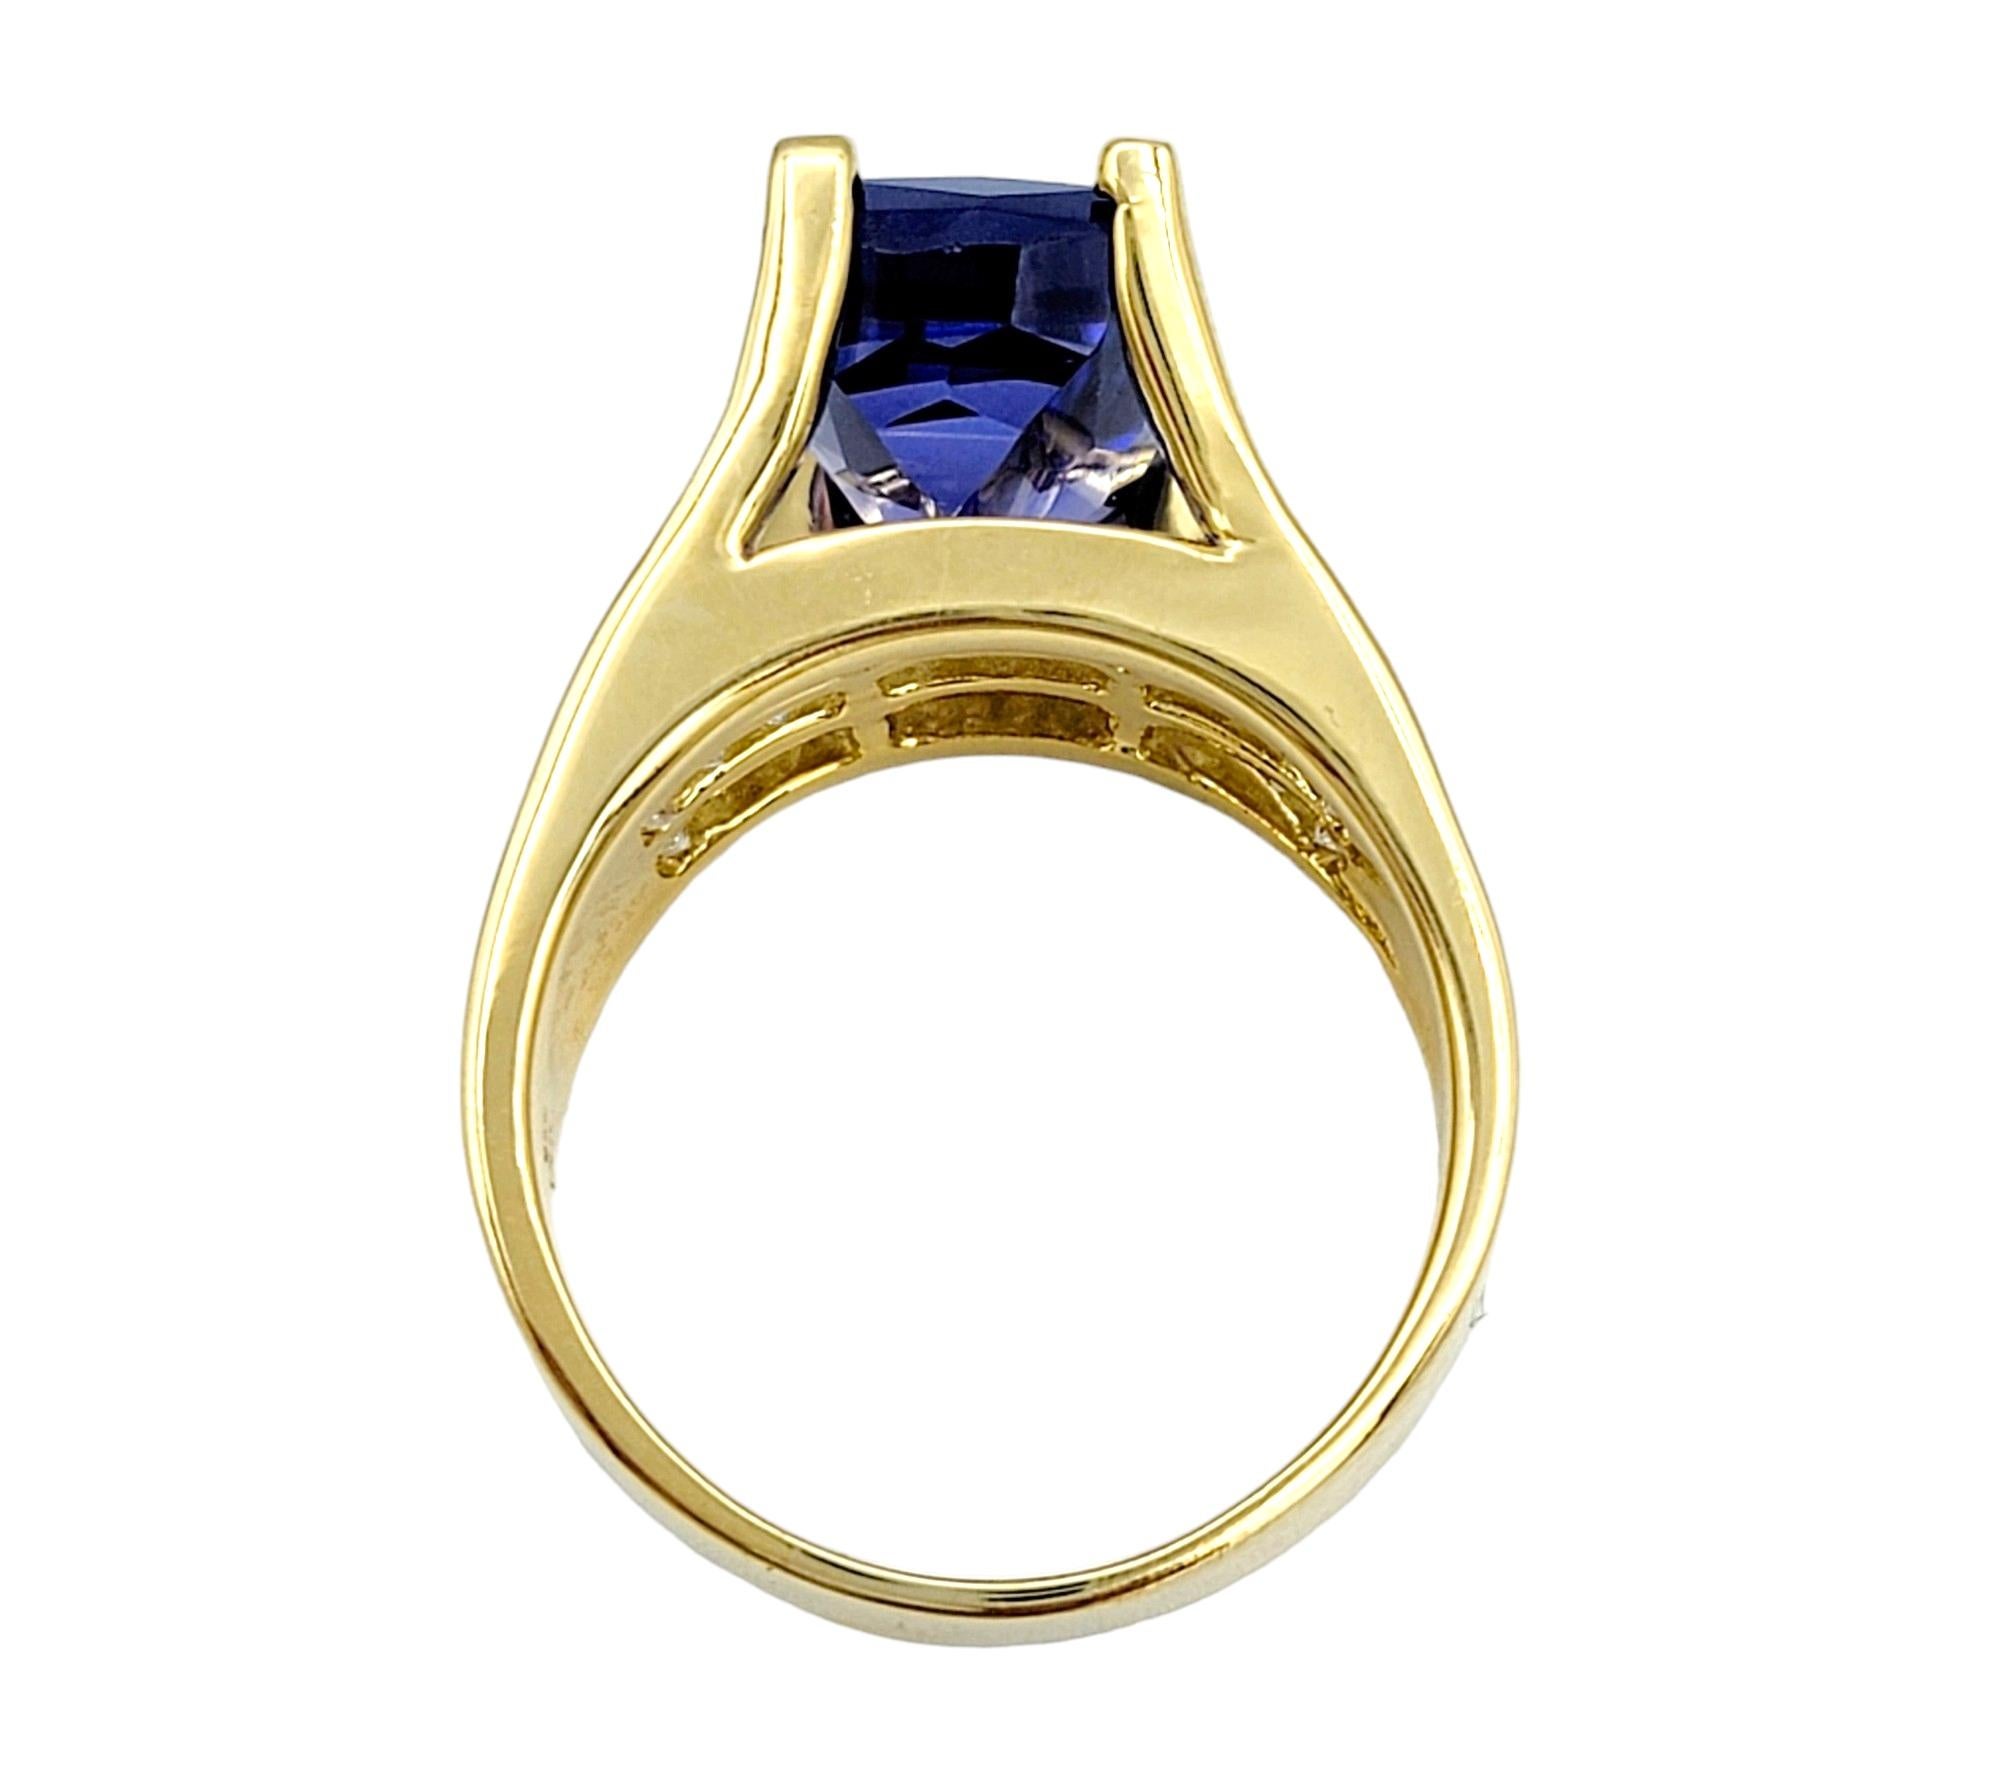 8.70 Carat Total Cushion Cut Tanzanite and Diamond Cocktail Ring 14 Karat Gold In Good Condition For Sale In Scottsdale, AZ